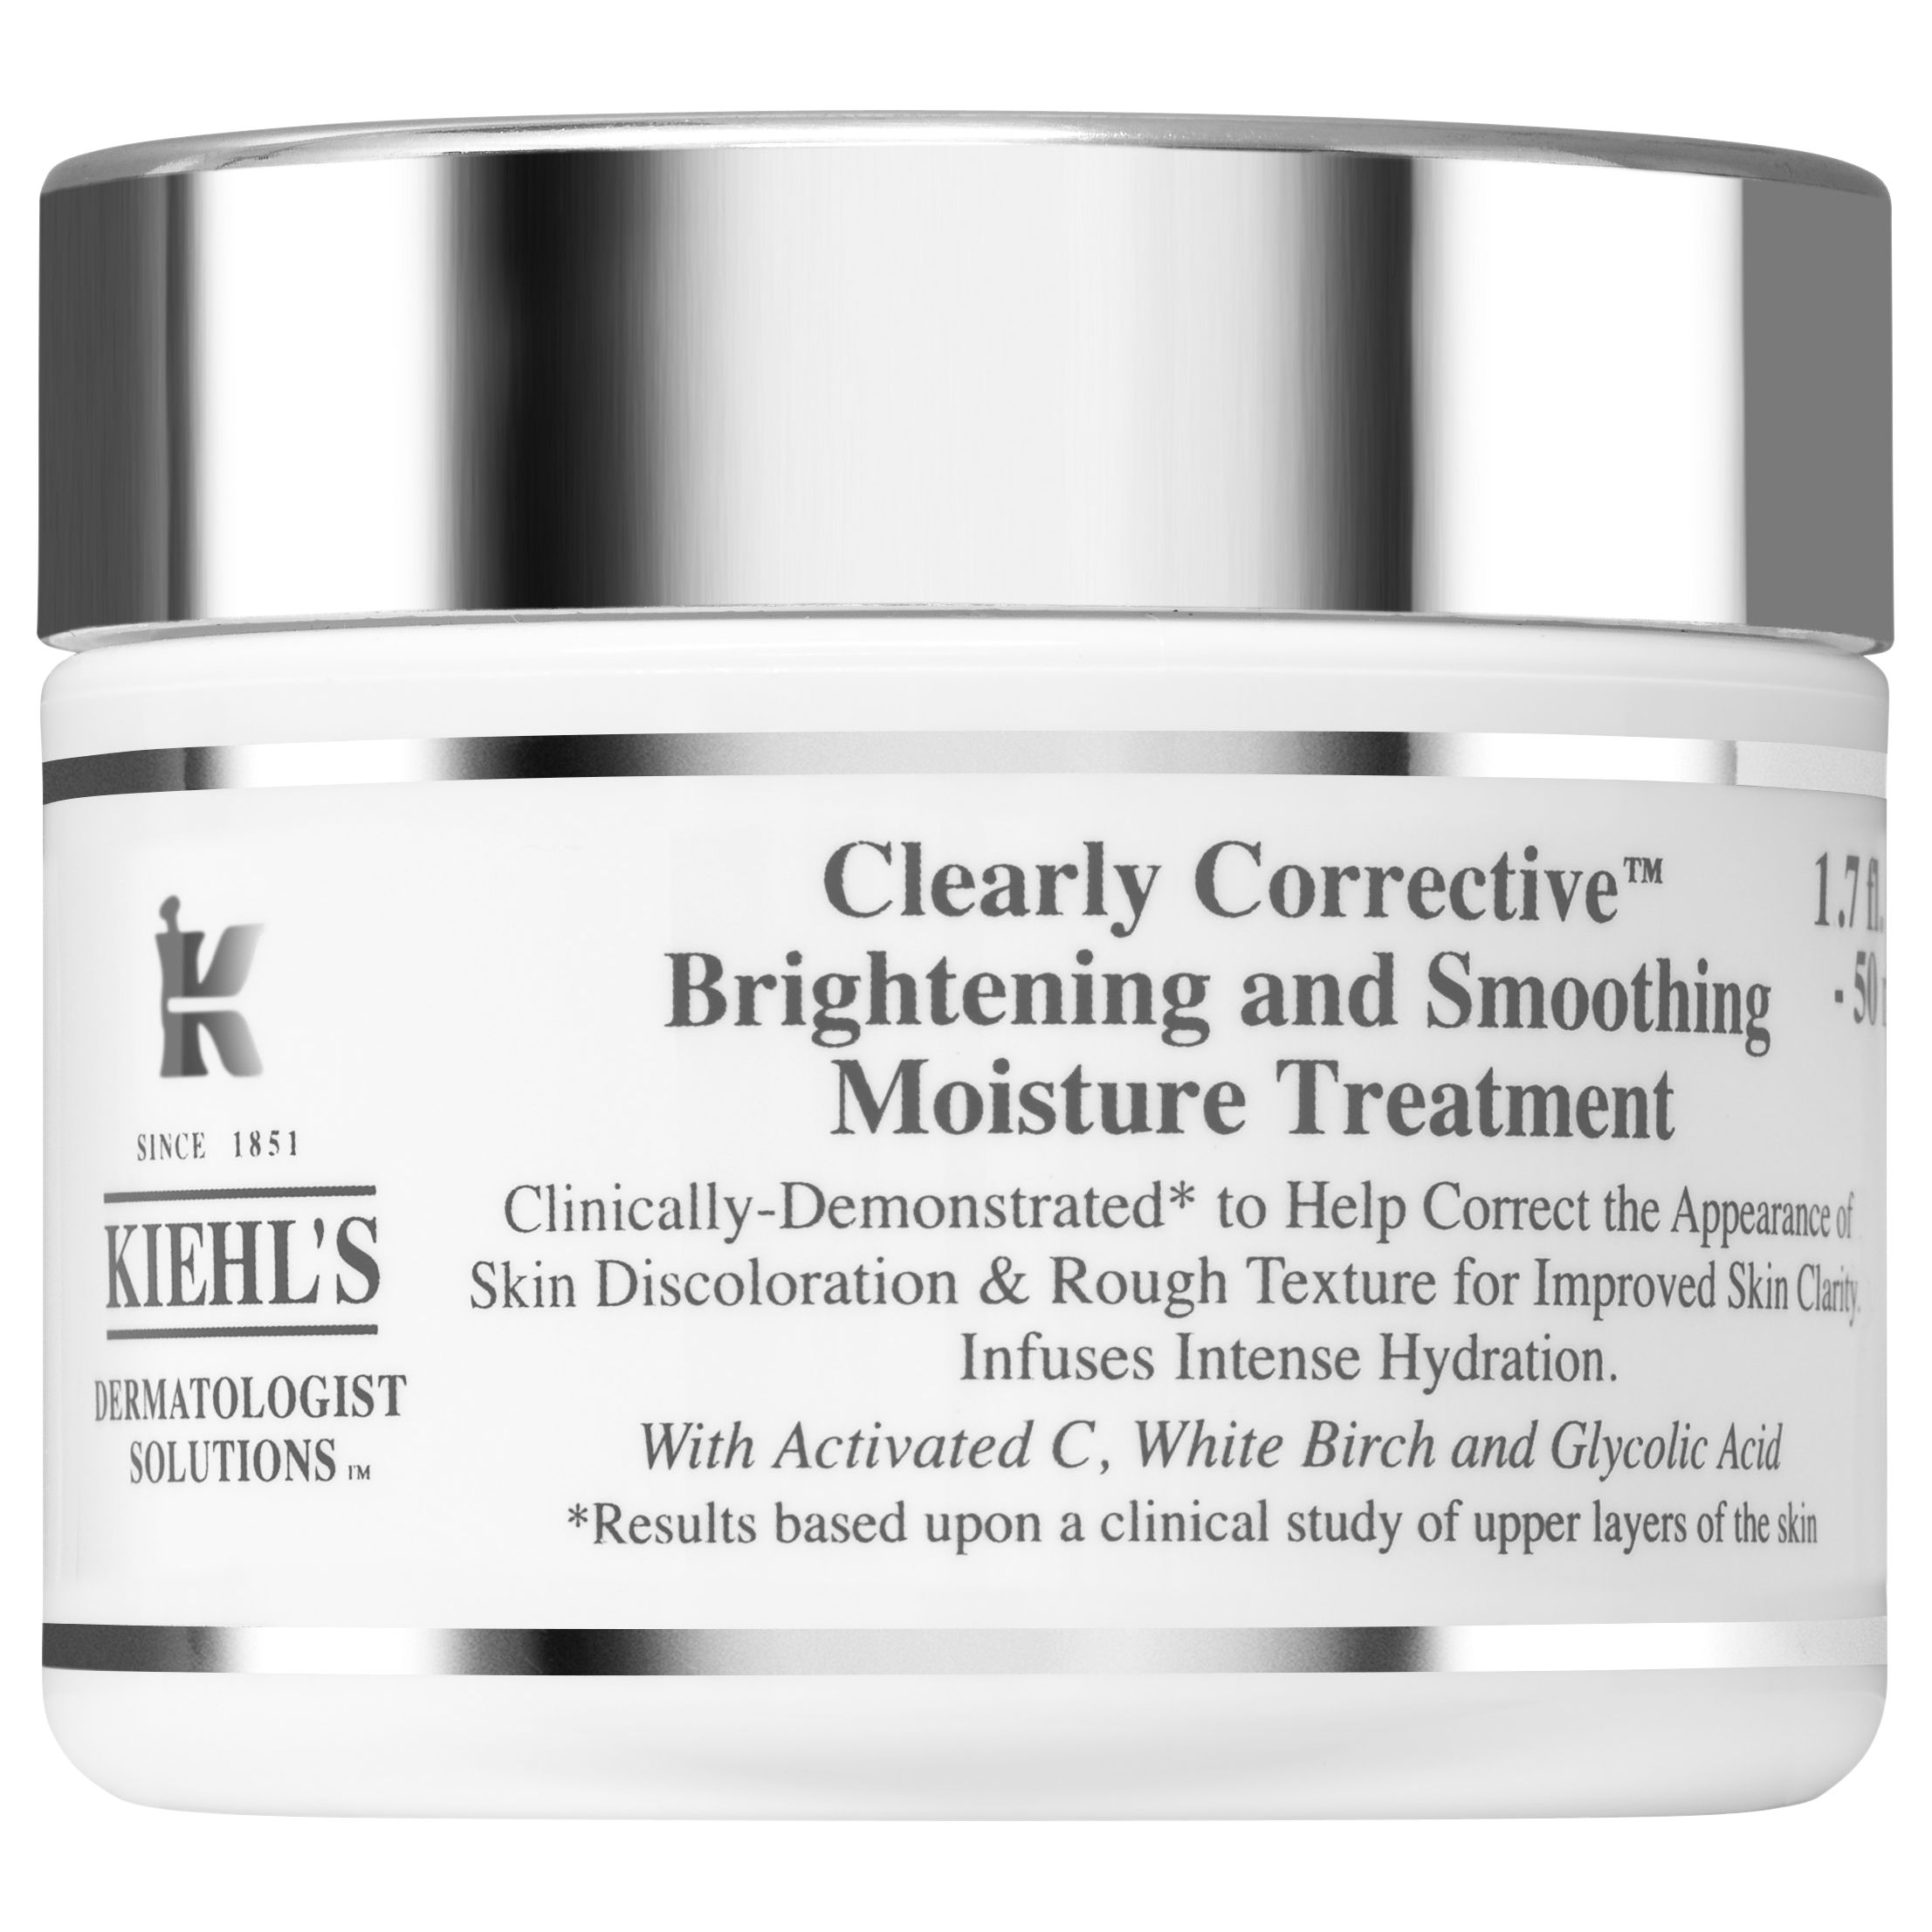 Kiehl's Clearly Corrective Brightening & Smoothing Moisture Treatment, 50ml 1